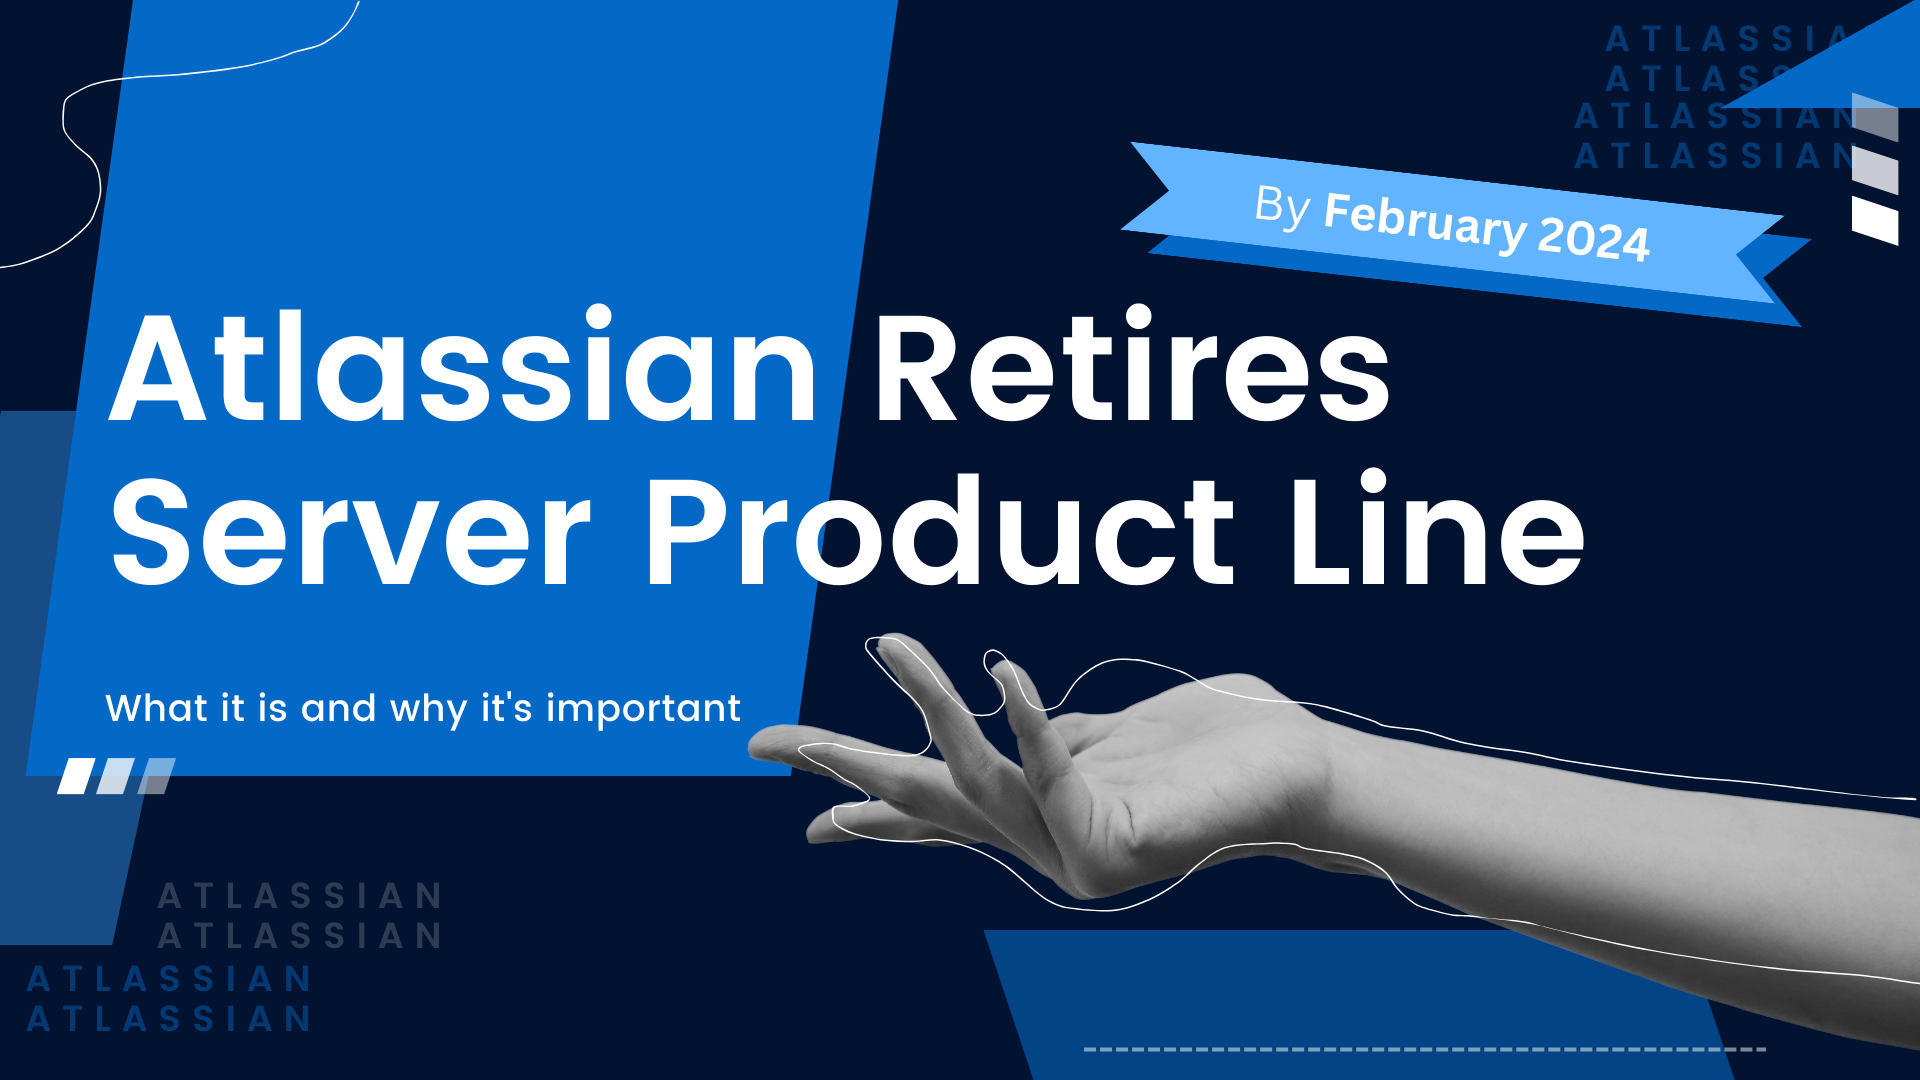 Thumbnail of Atlassian Retires Server Product Line by February 2024